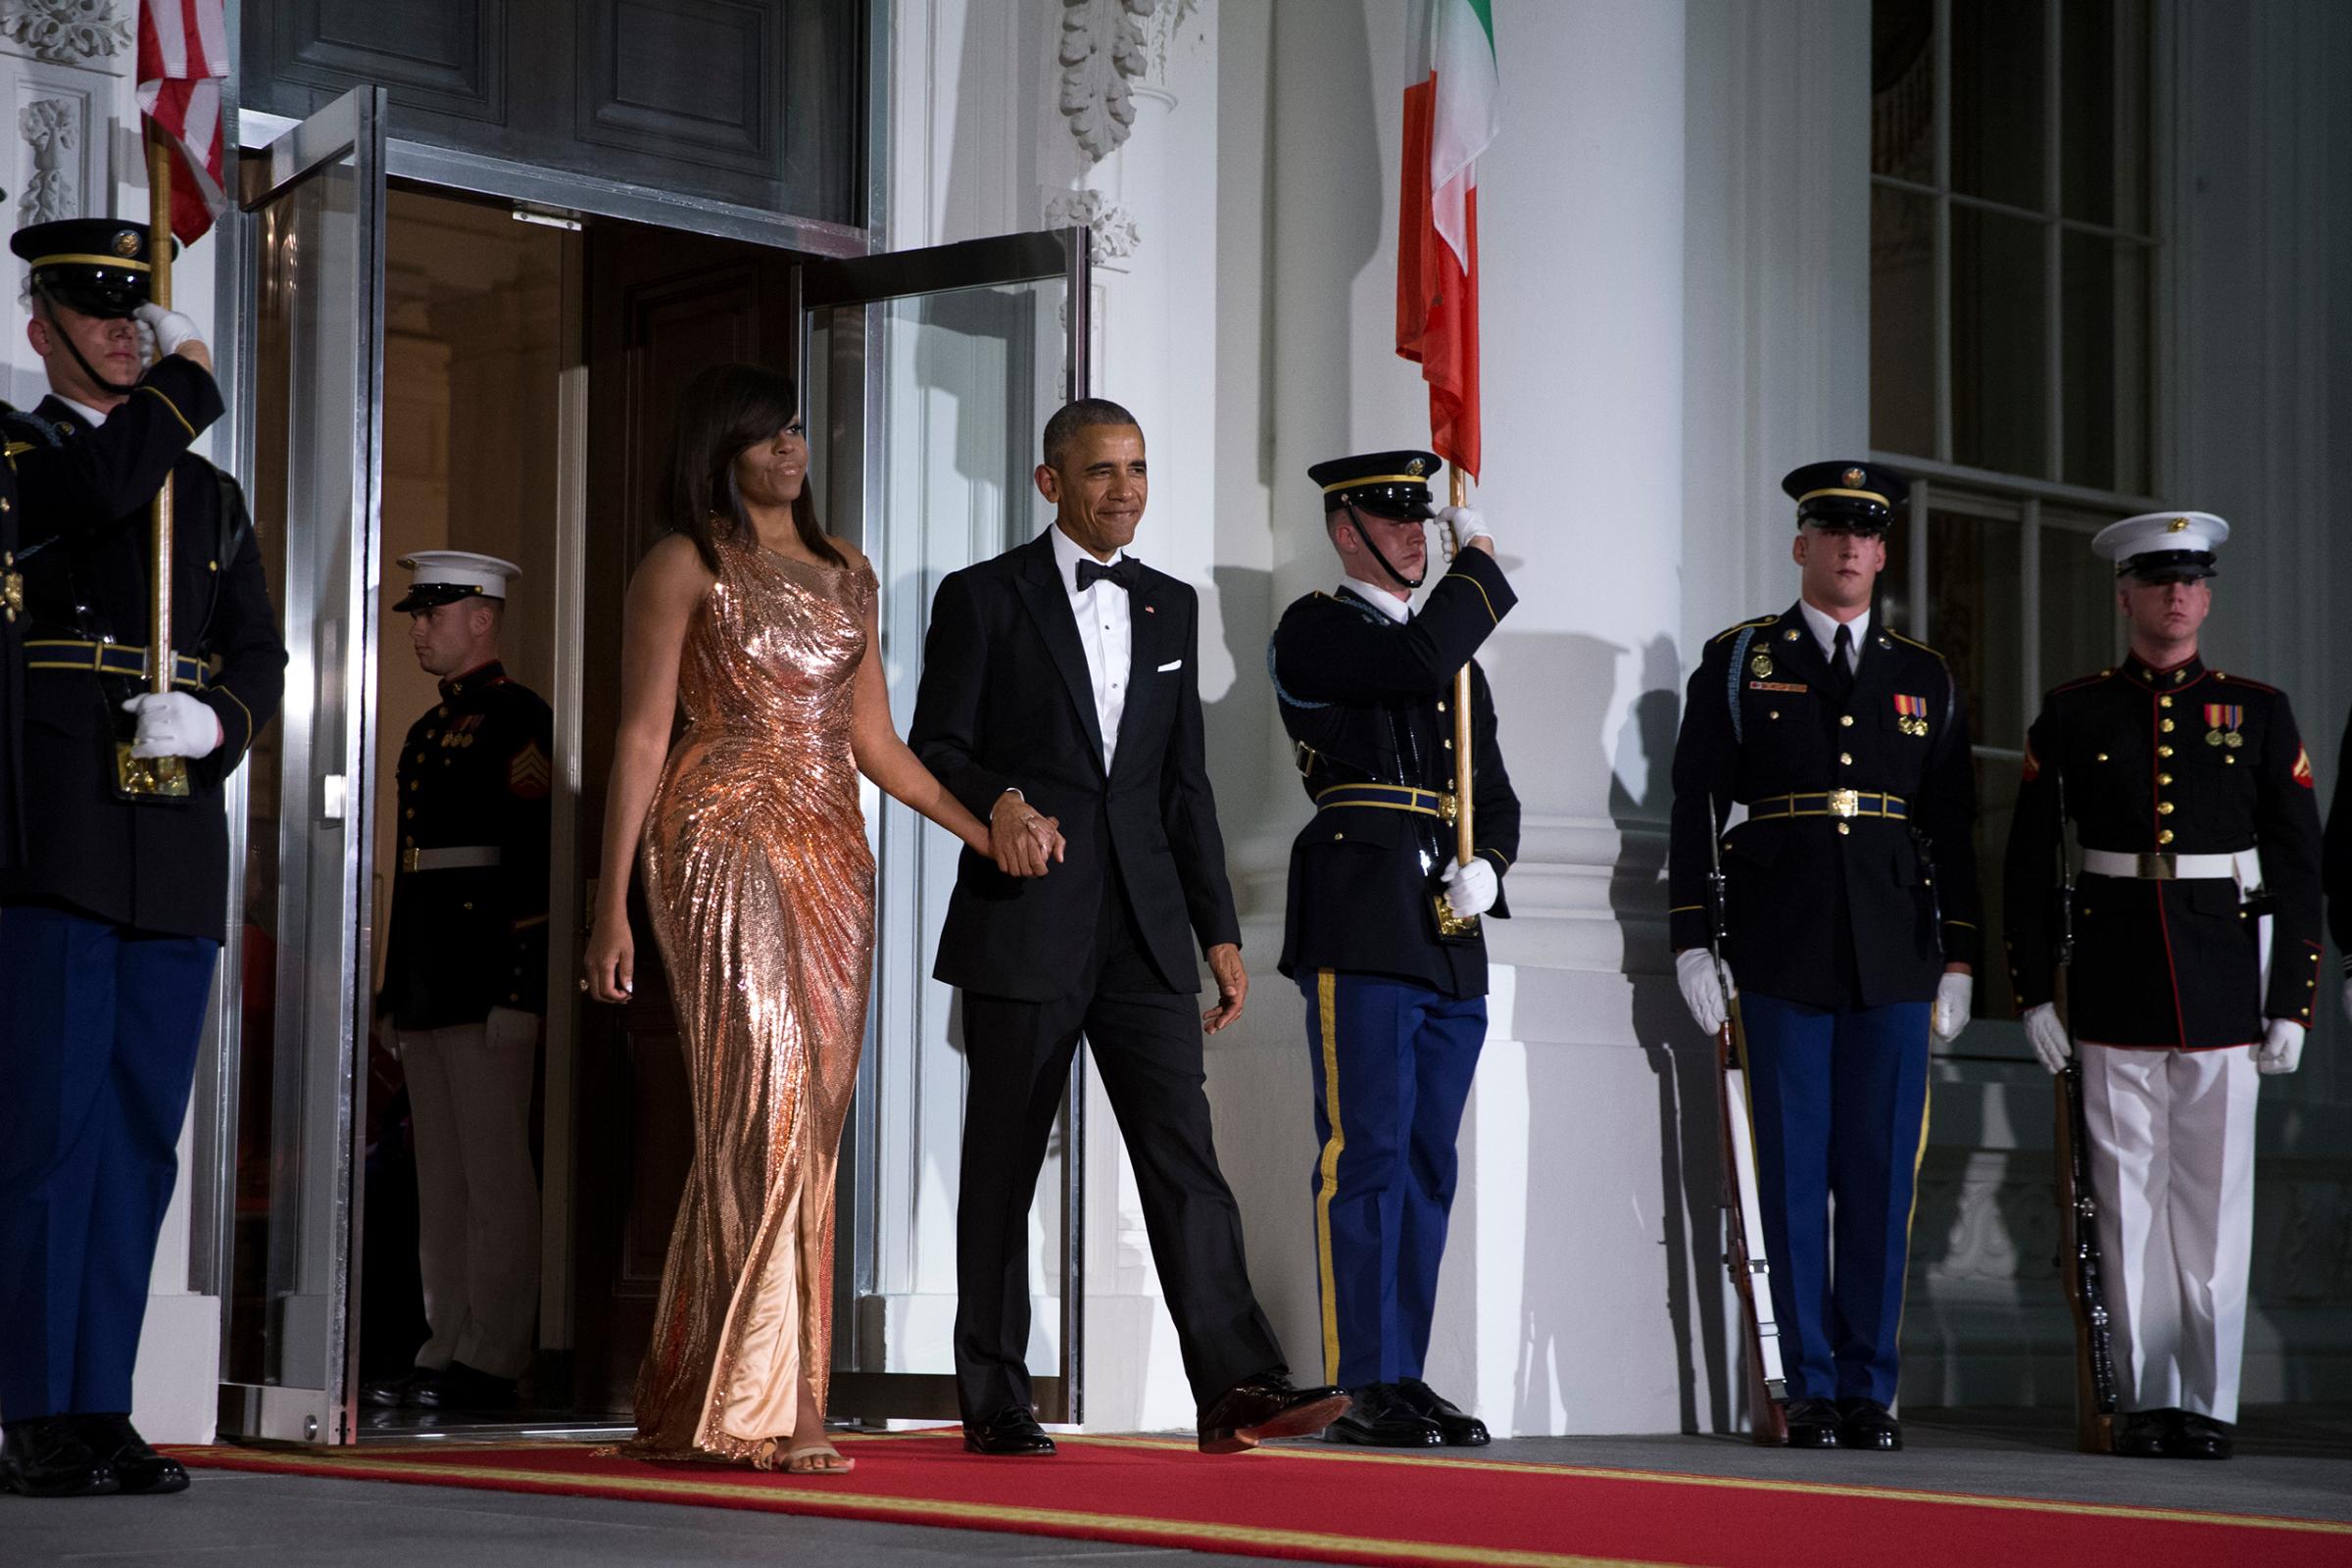 Barack Obama (R) and Michelle Obama (L) walk outside to greet Italian Prime Minister Matteo Renzi and Italian First Lady Agnese Landini prior to the state dinner at the White House on Oct. 18, 2016 in Washington DC.